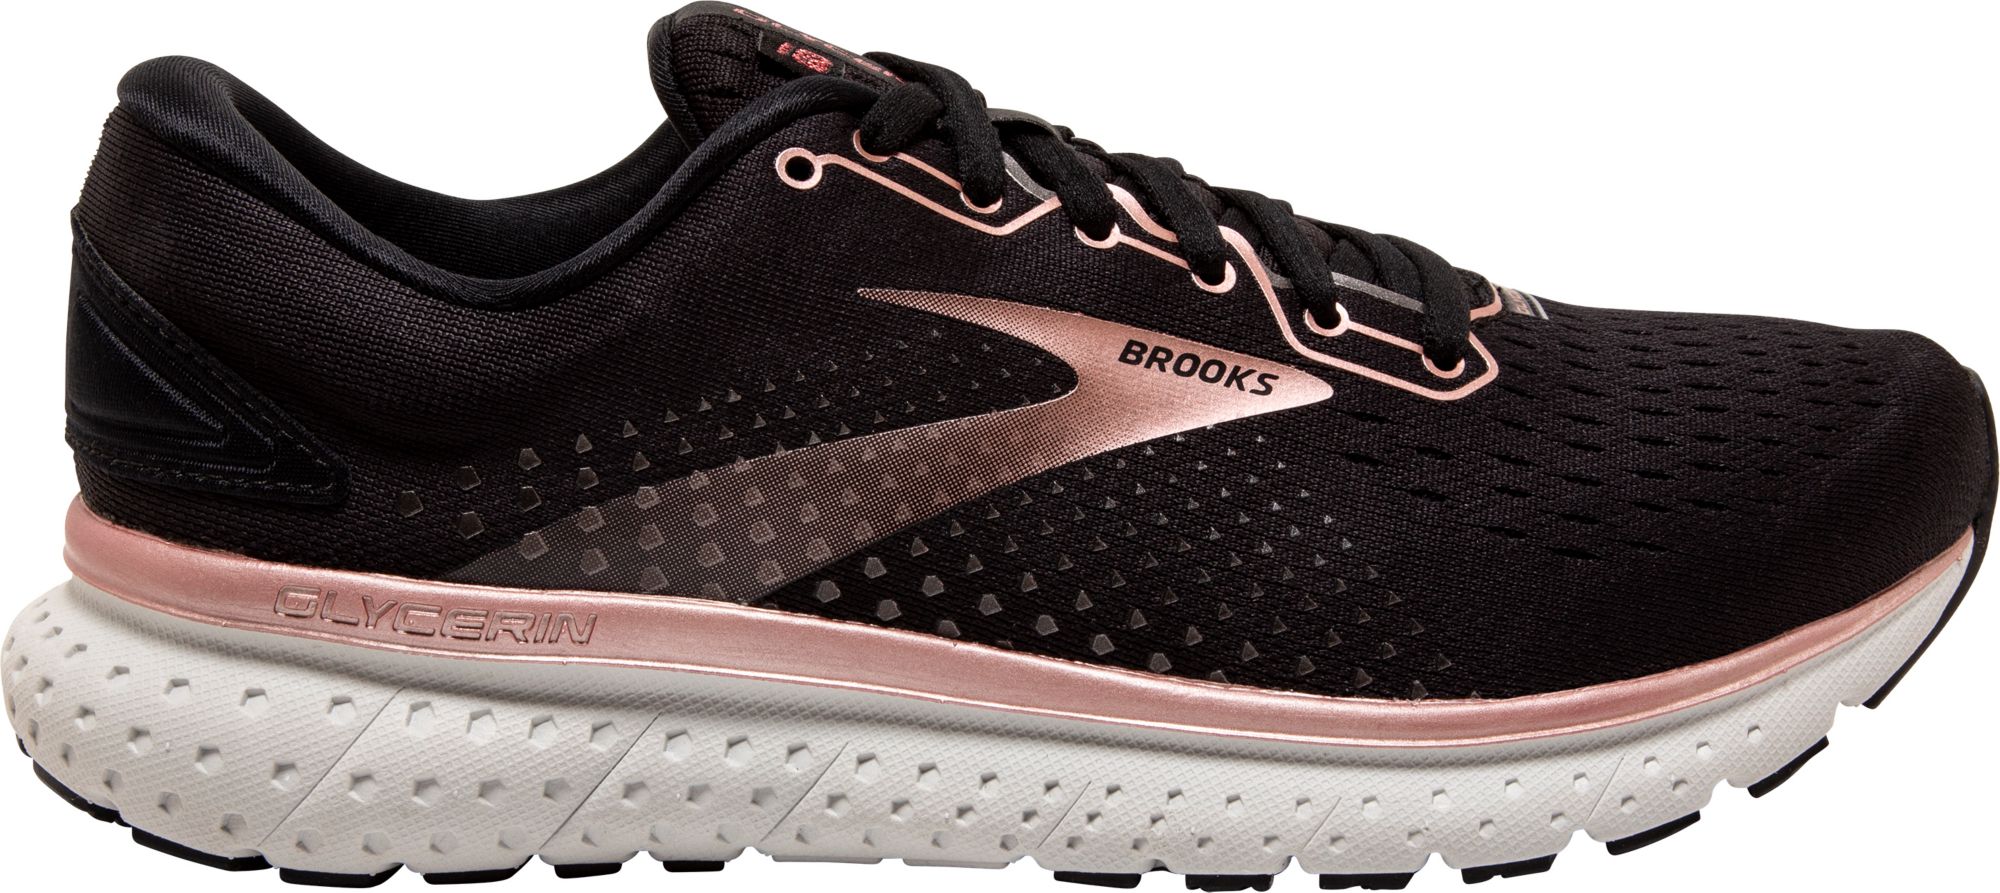 brooks black and rose gold sneaker